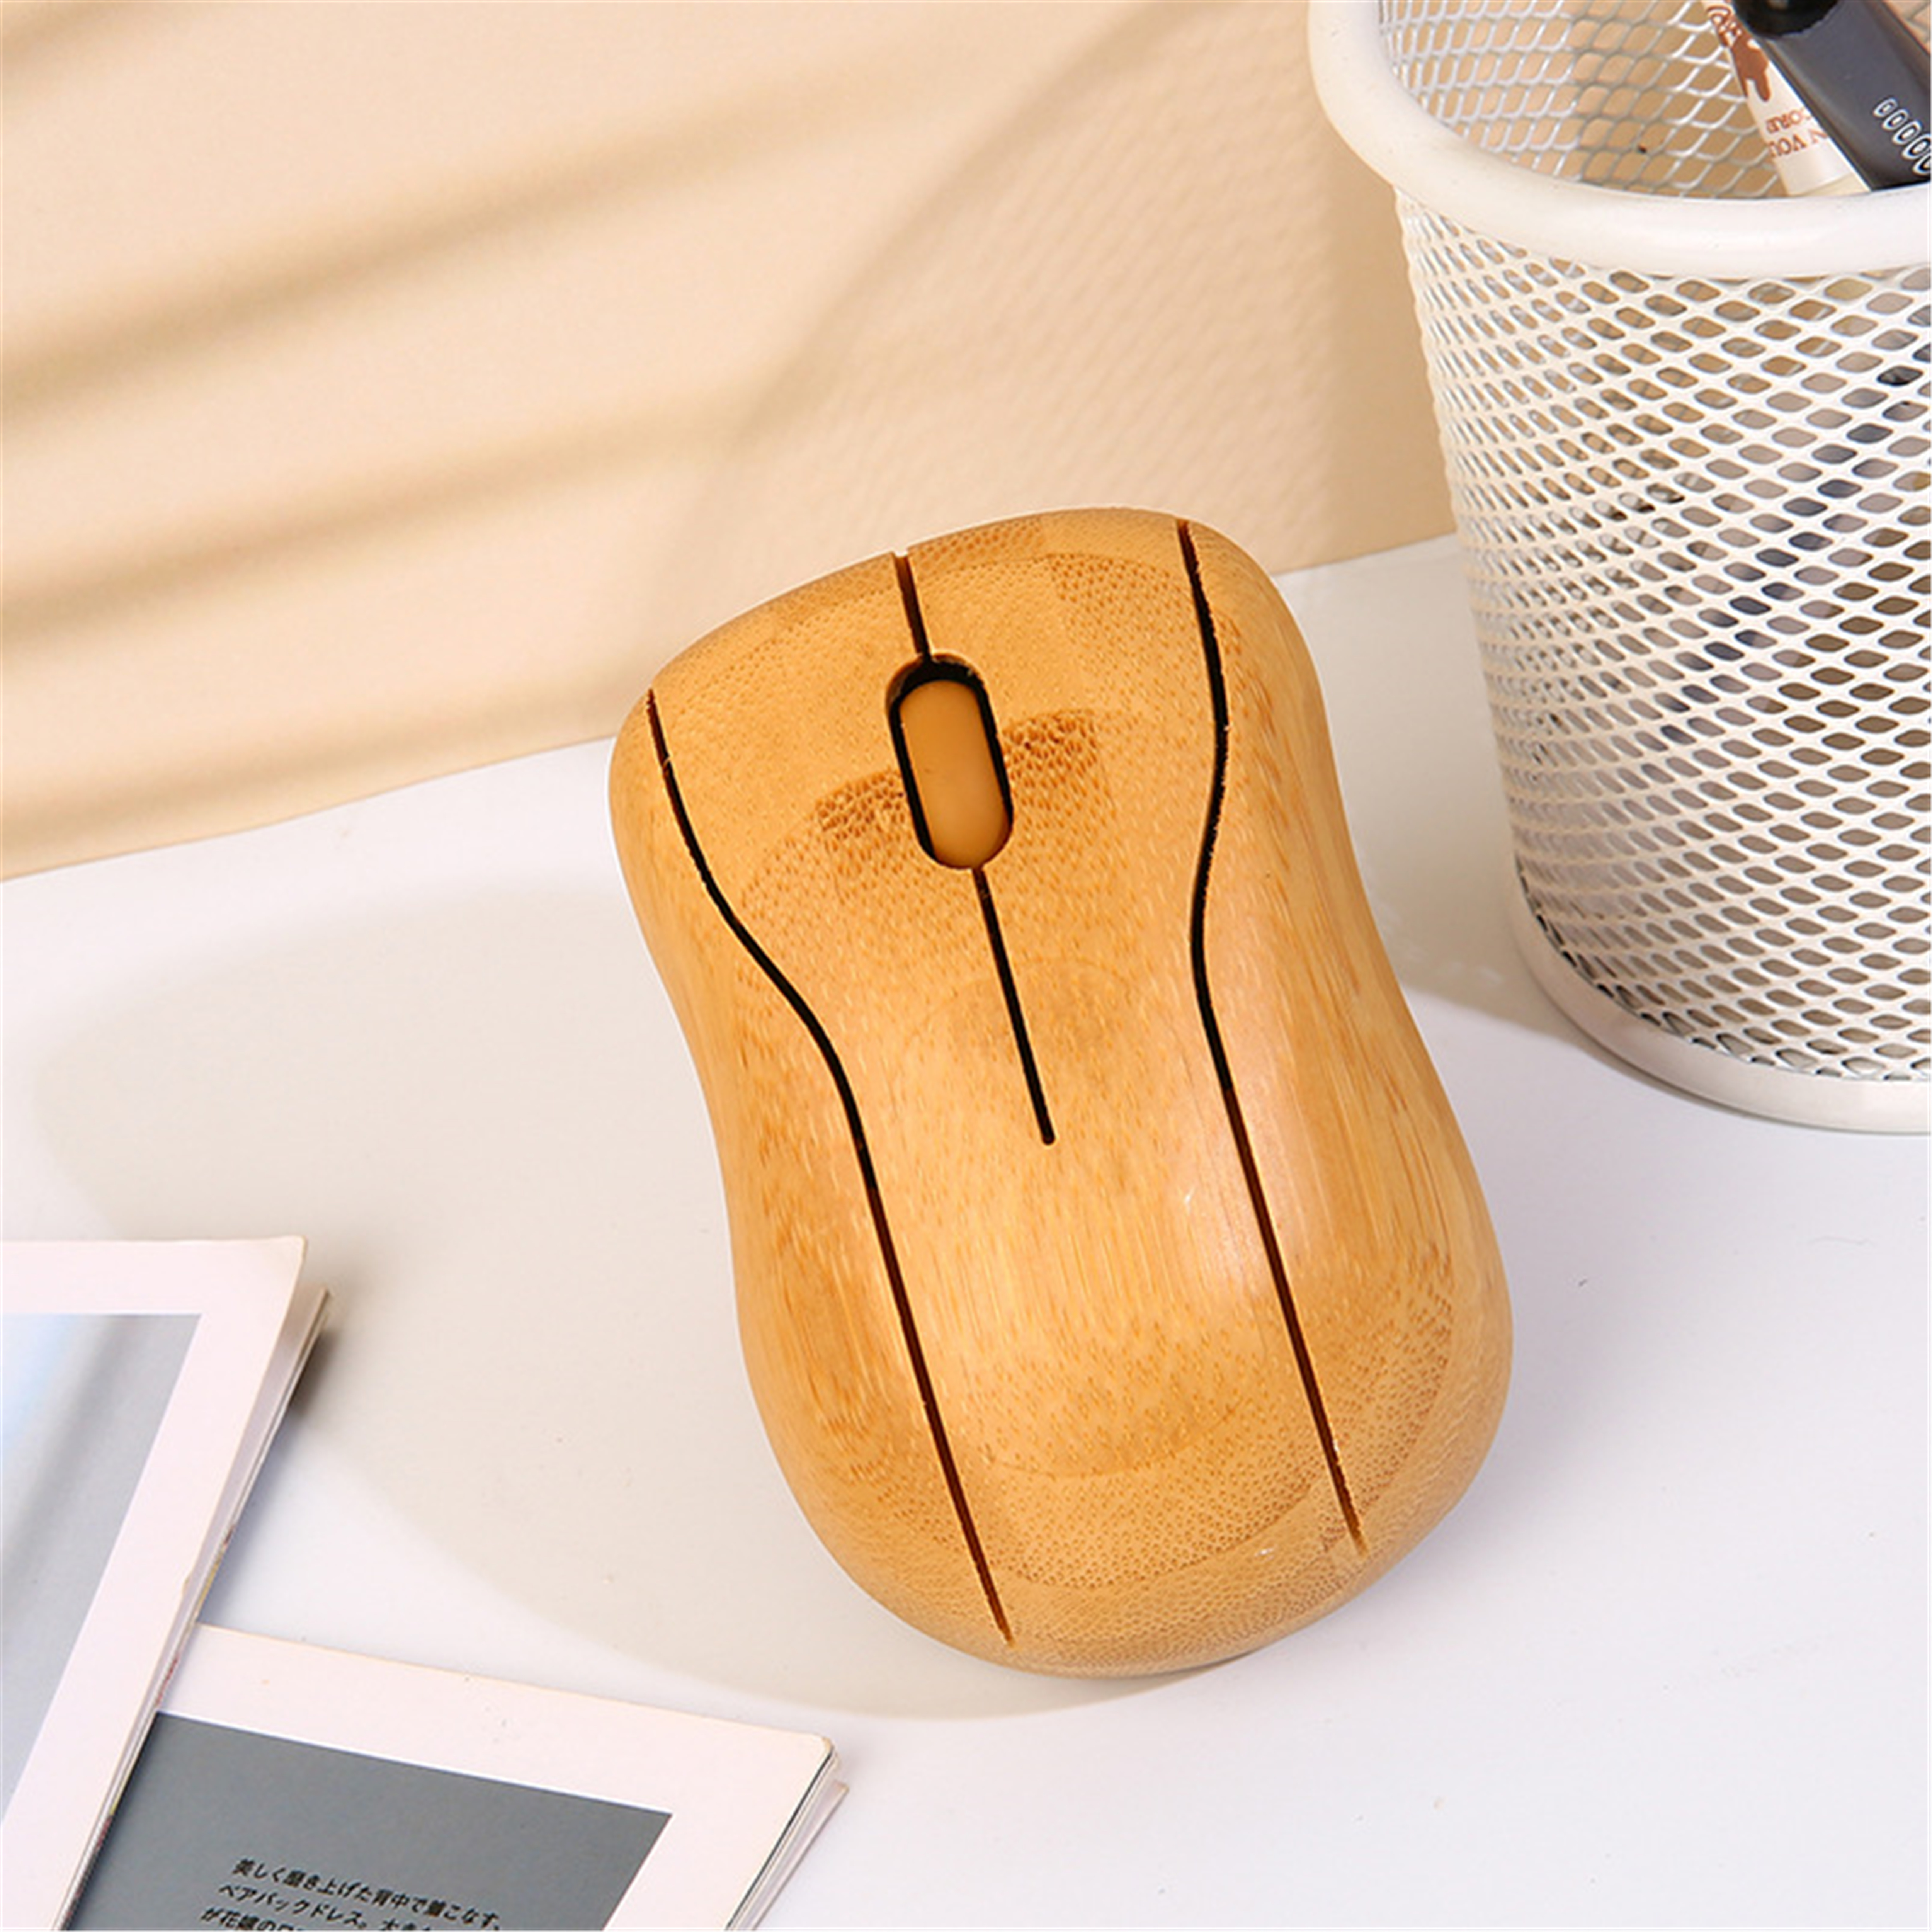 Creative bamboo wood wireless mouse office home wireless mouse laptop bamboo mouse